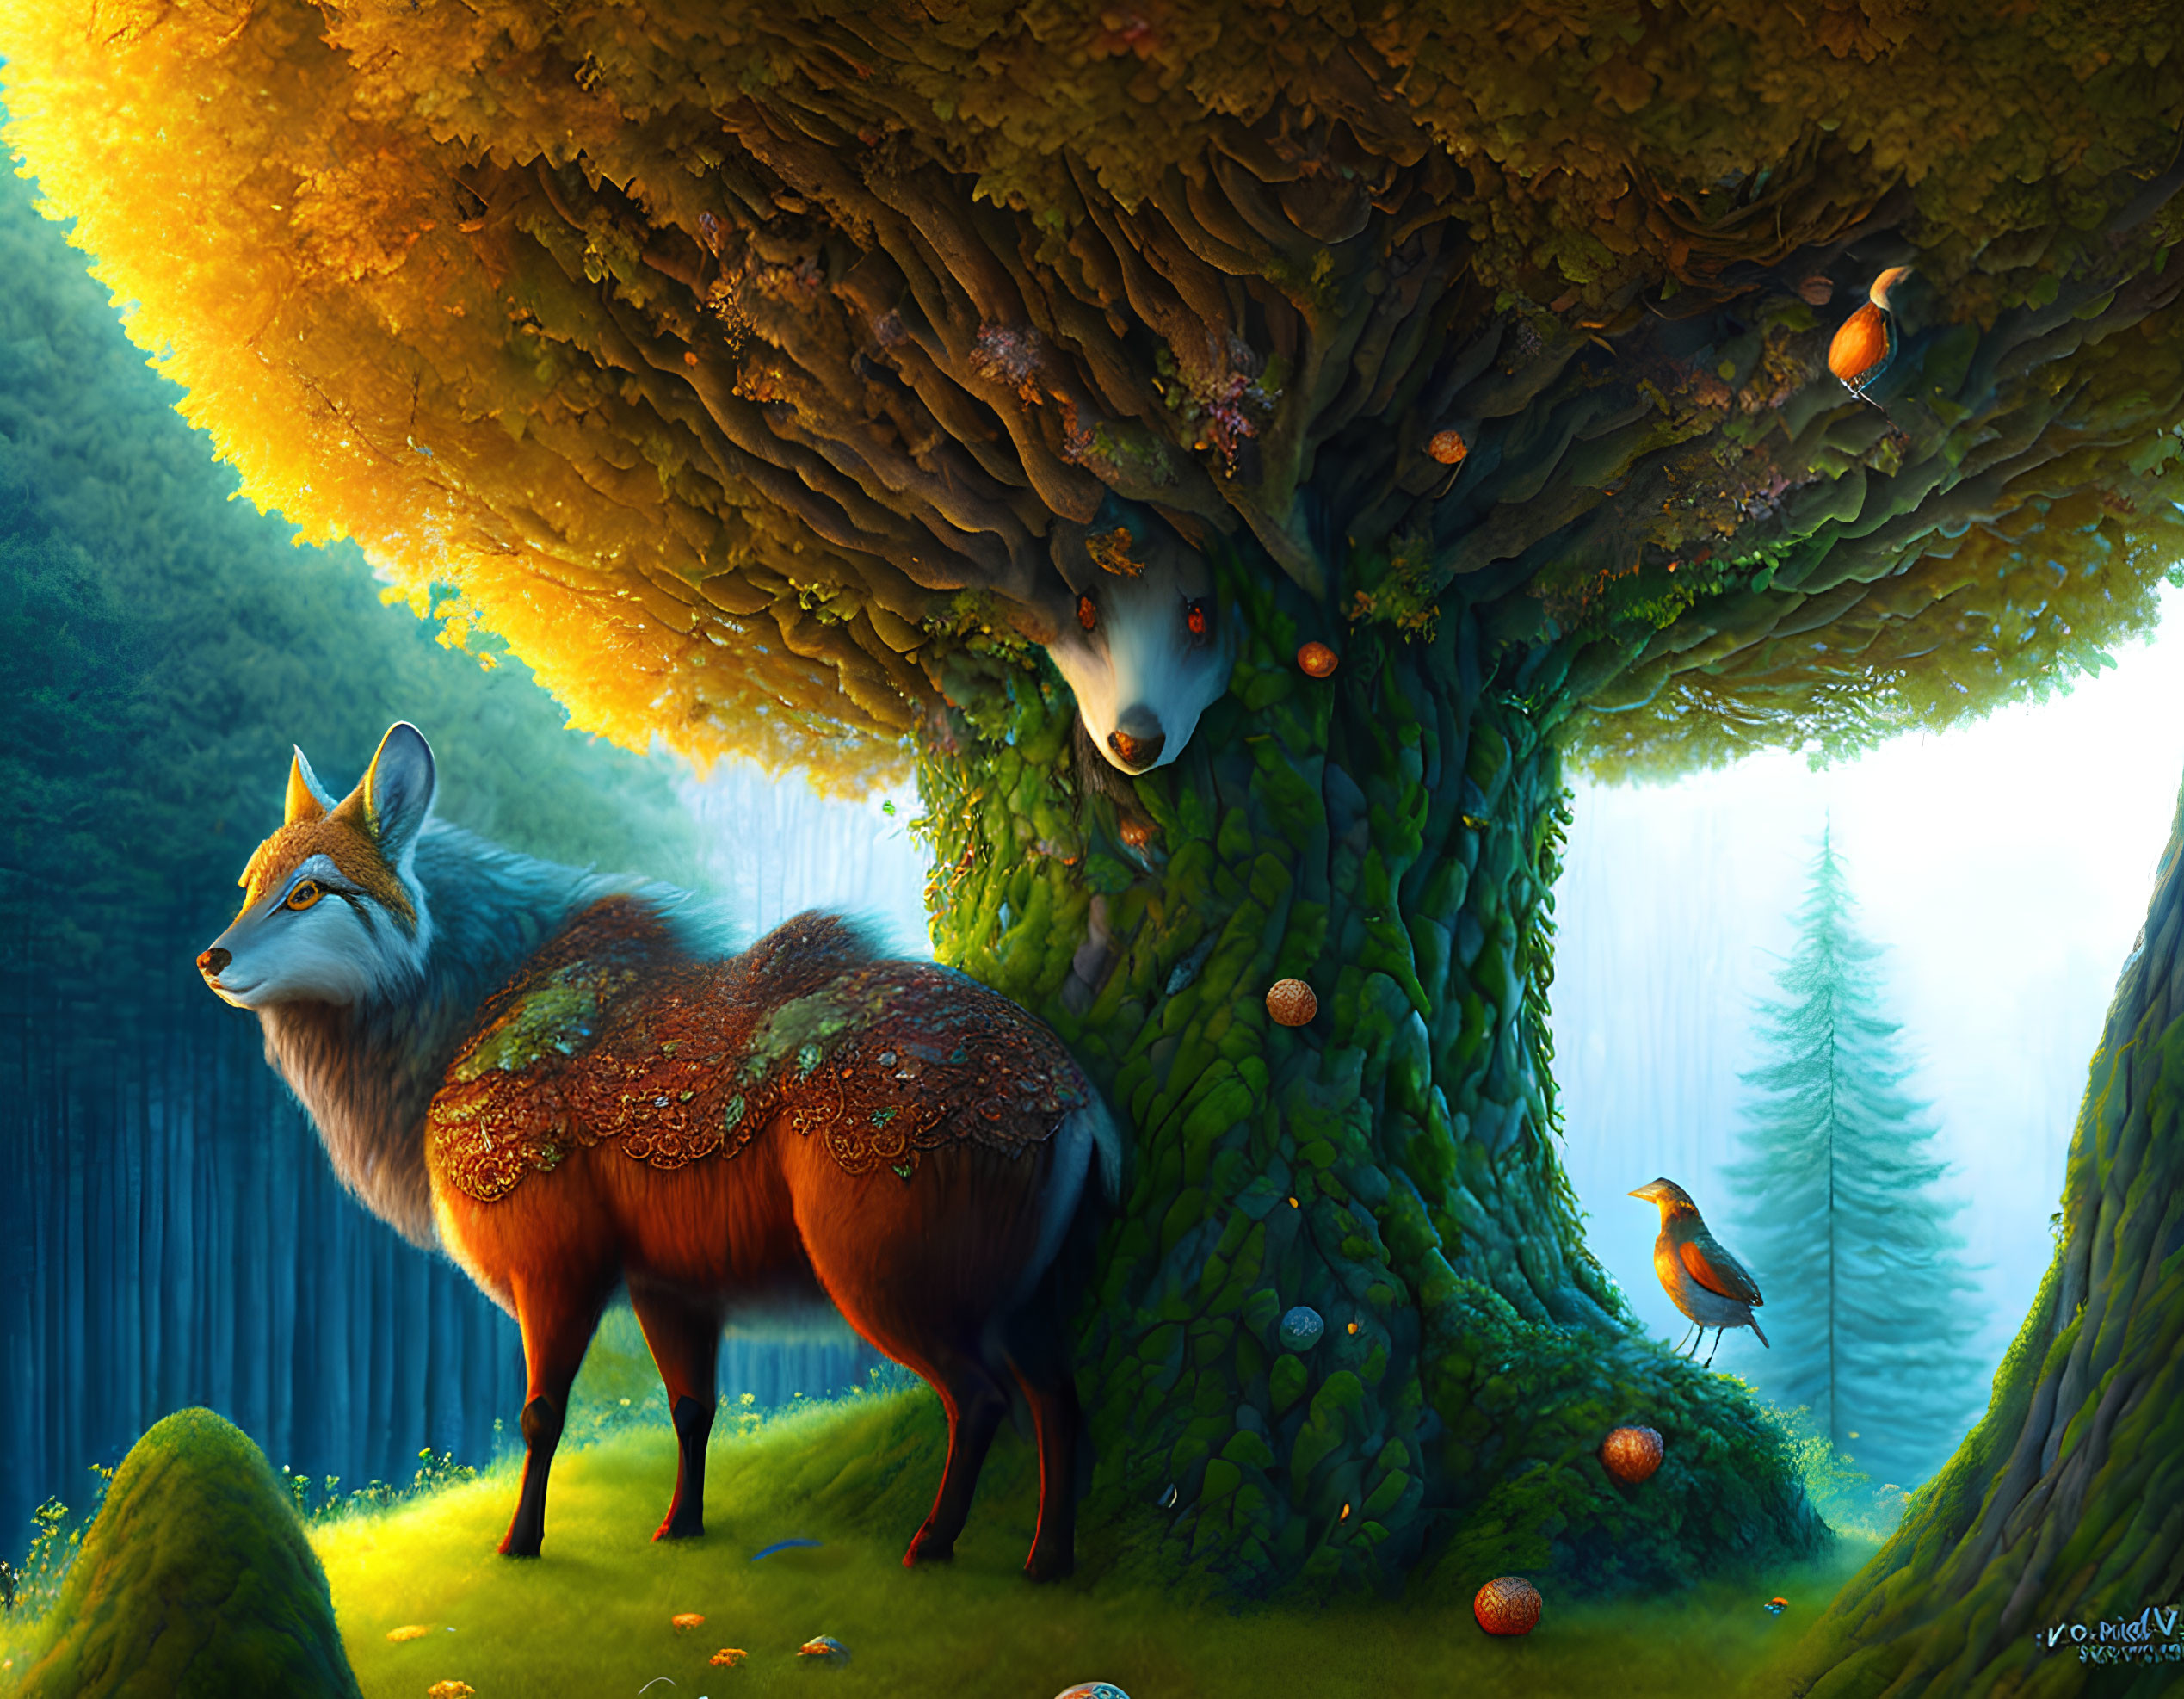 Colorful digital artwork of mystic forest with fantastical foxes and glowing fruit